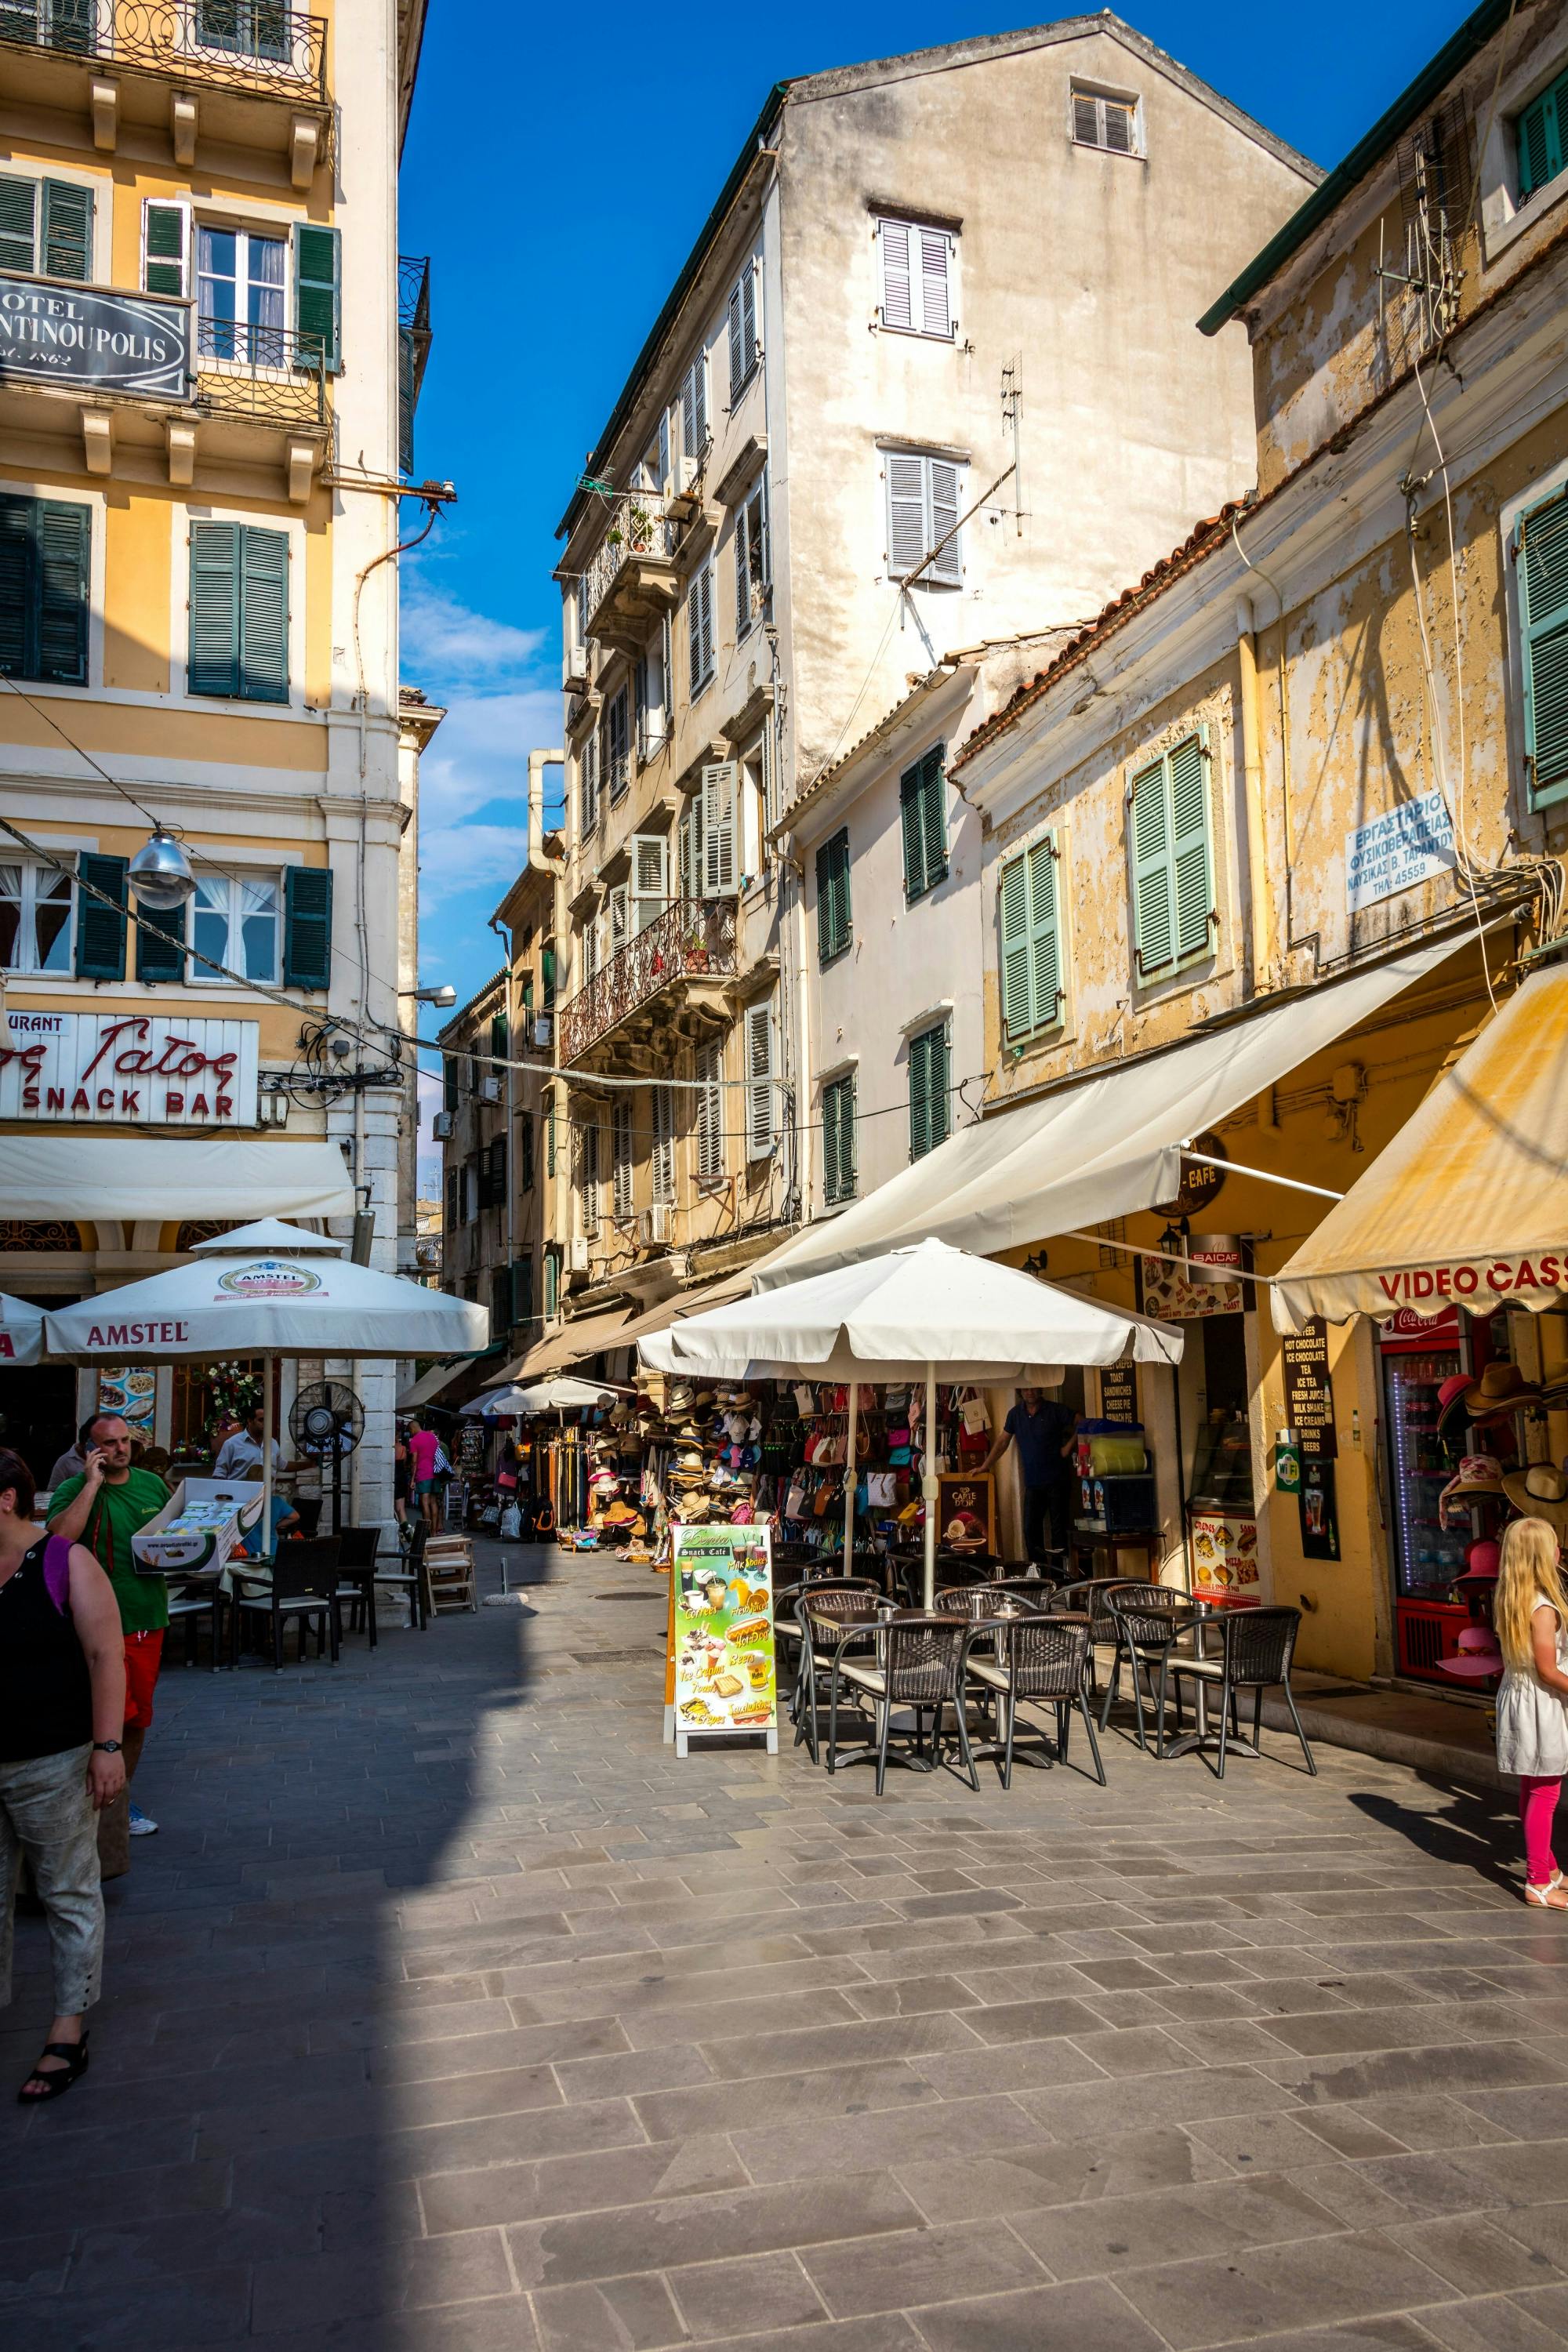 Corfu Town Tour and Bay Cruise with Taverna Dinner